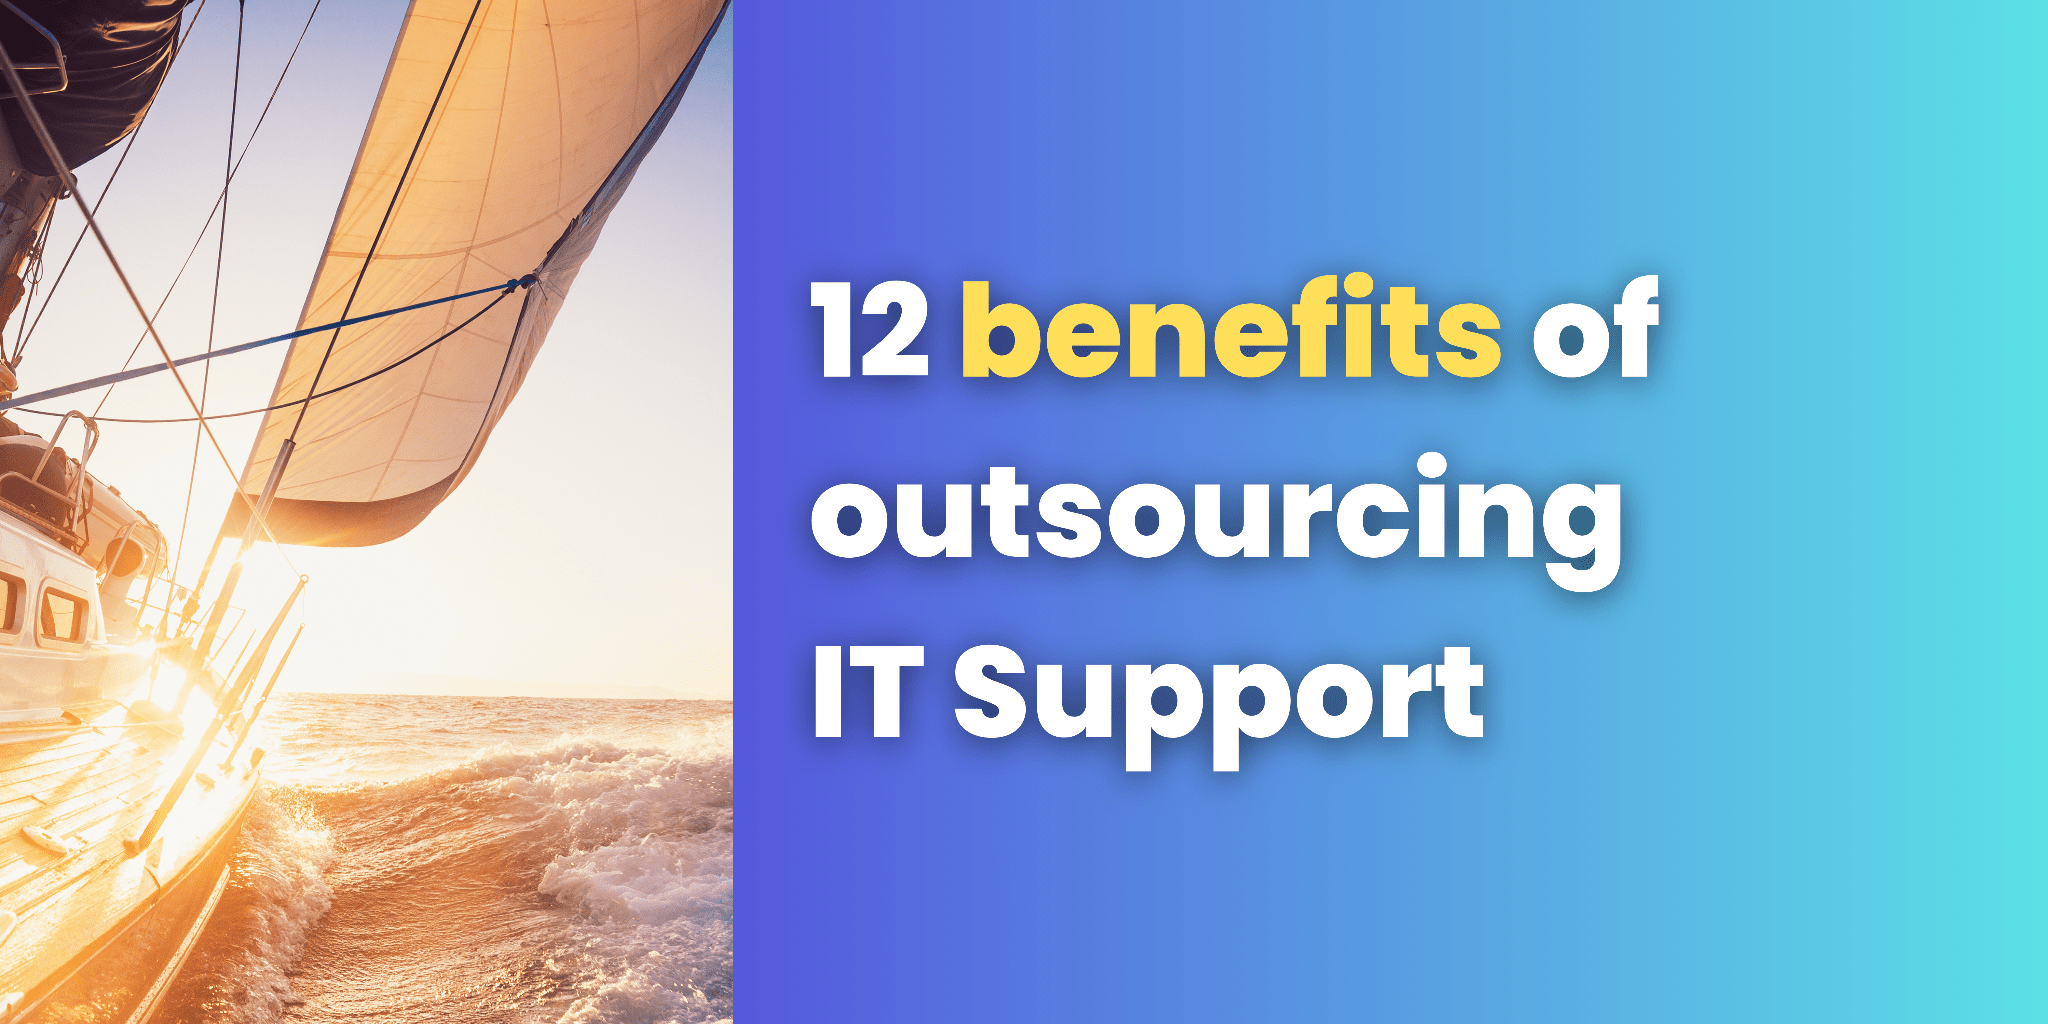 12 Benefits of Outsourcing IT Support